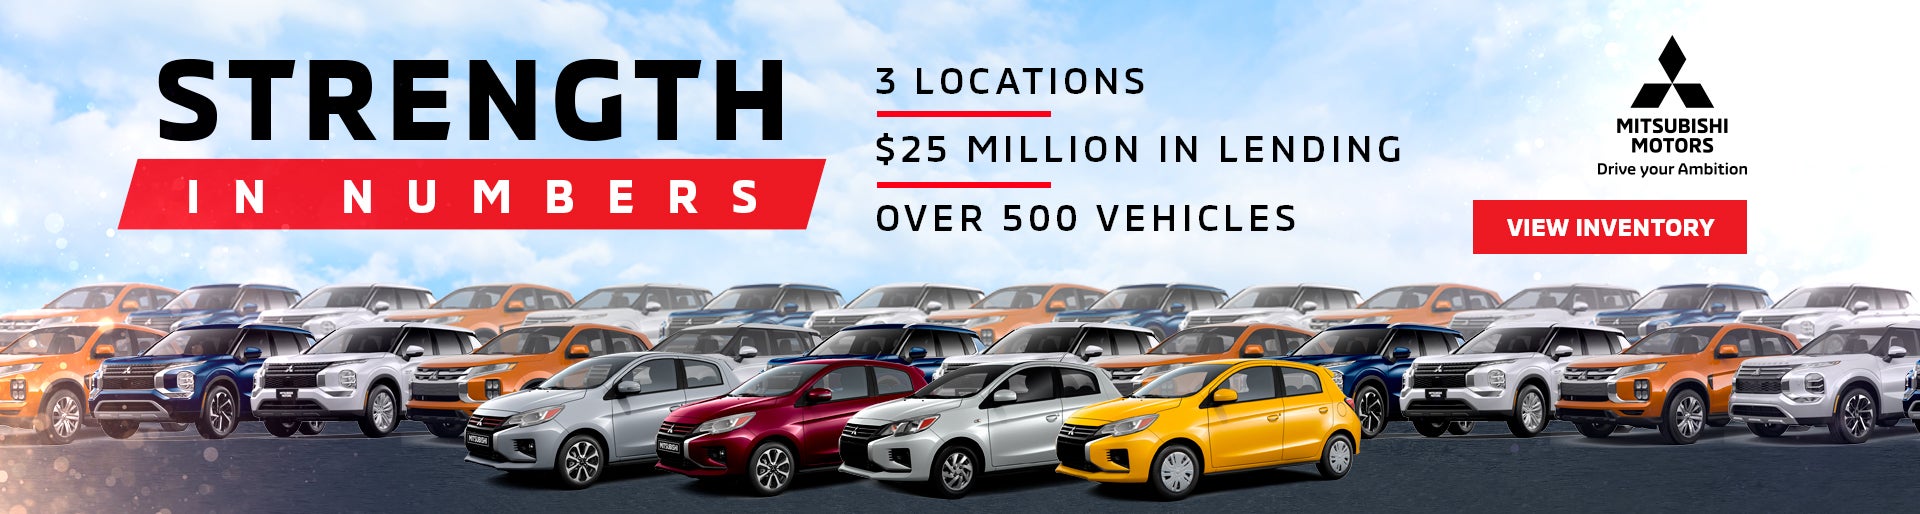 3 Locations, $25 million in lending, over 500 vehicles